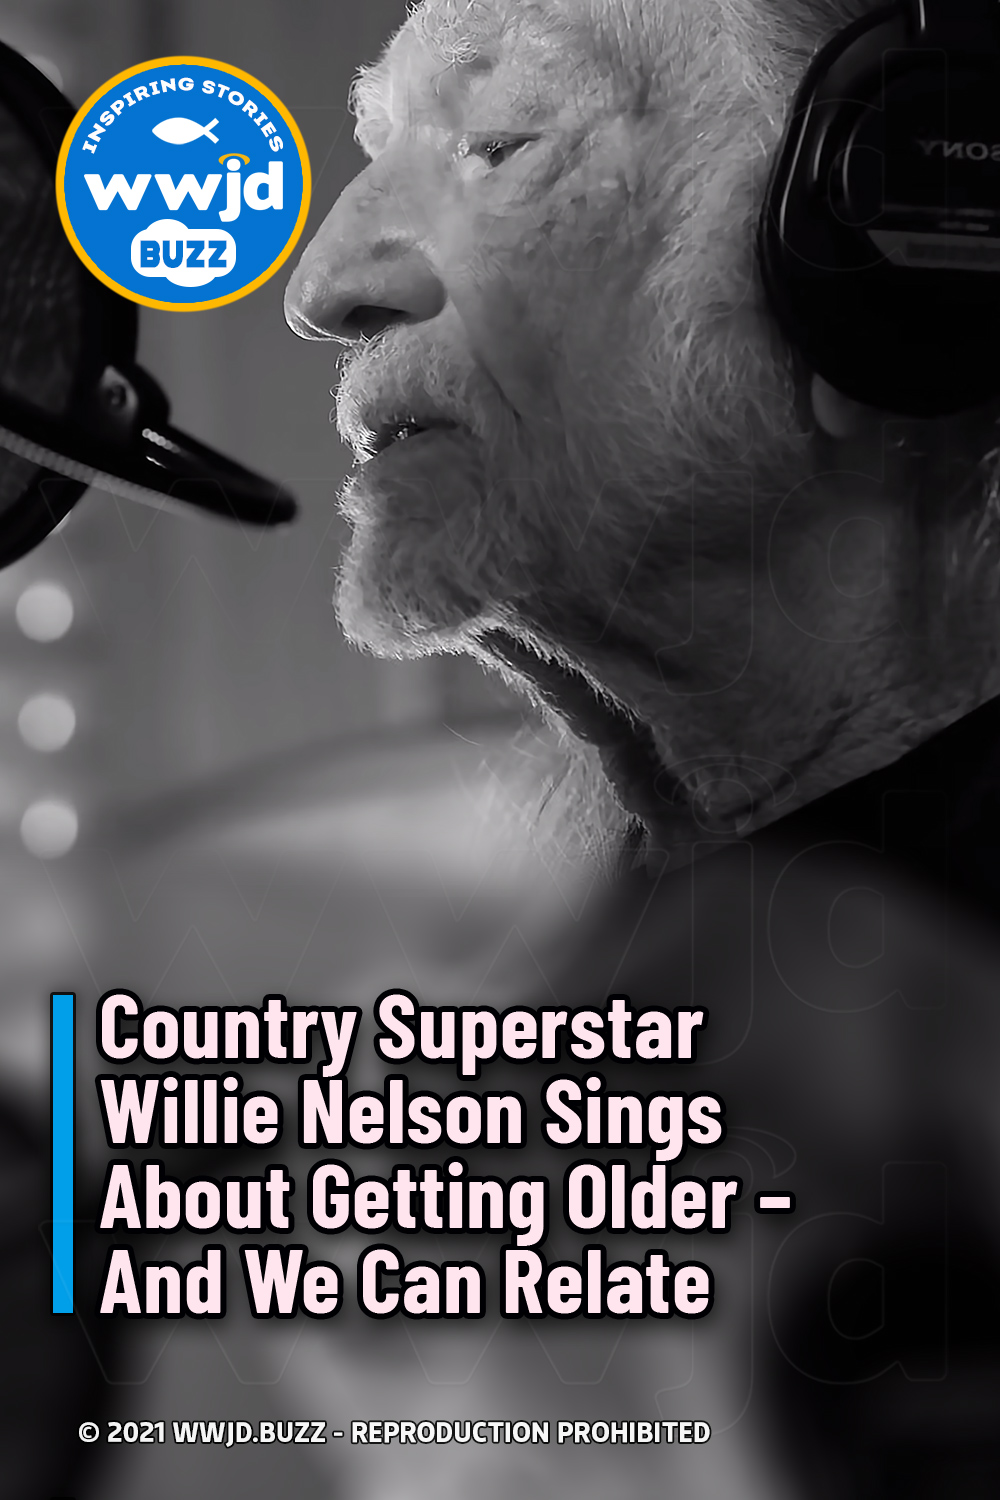 Country Superstar Willie Nelson Sings About Getting Older - And We Can Relate